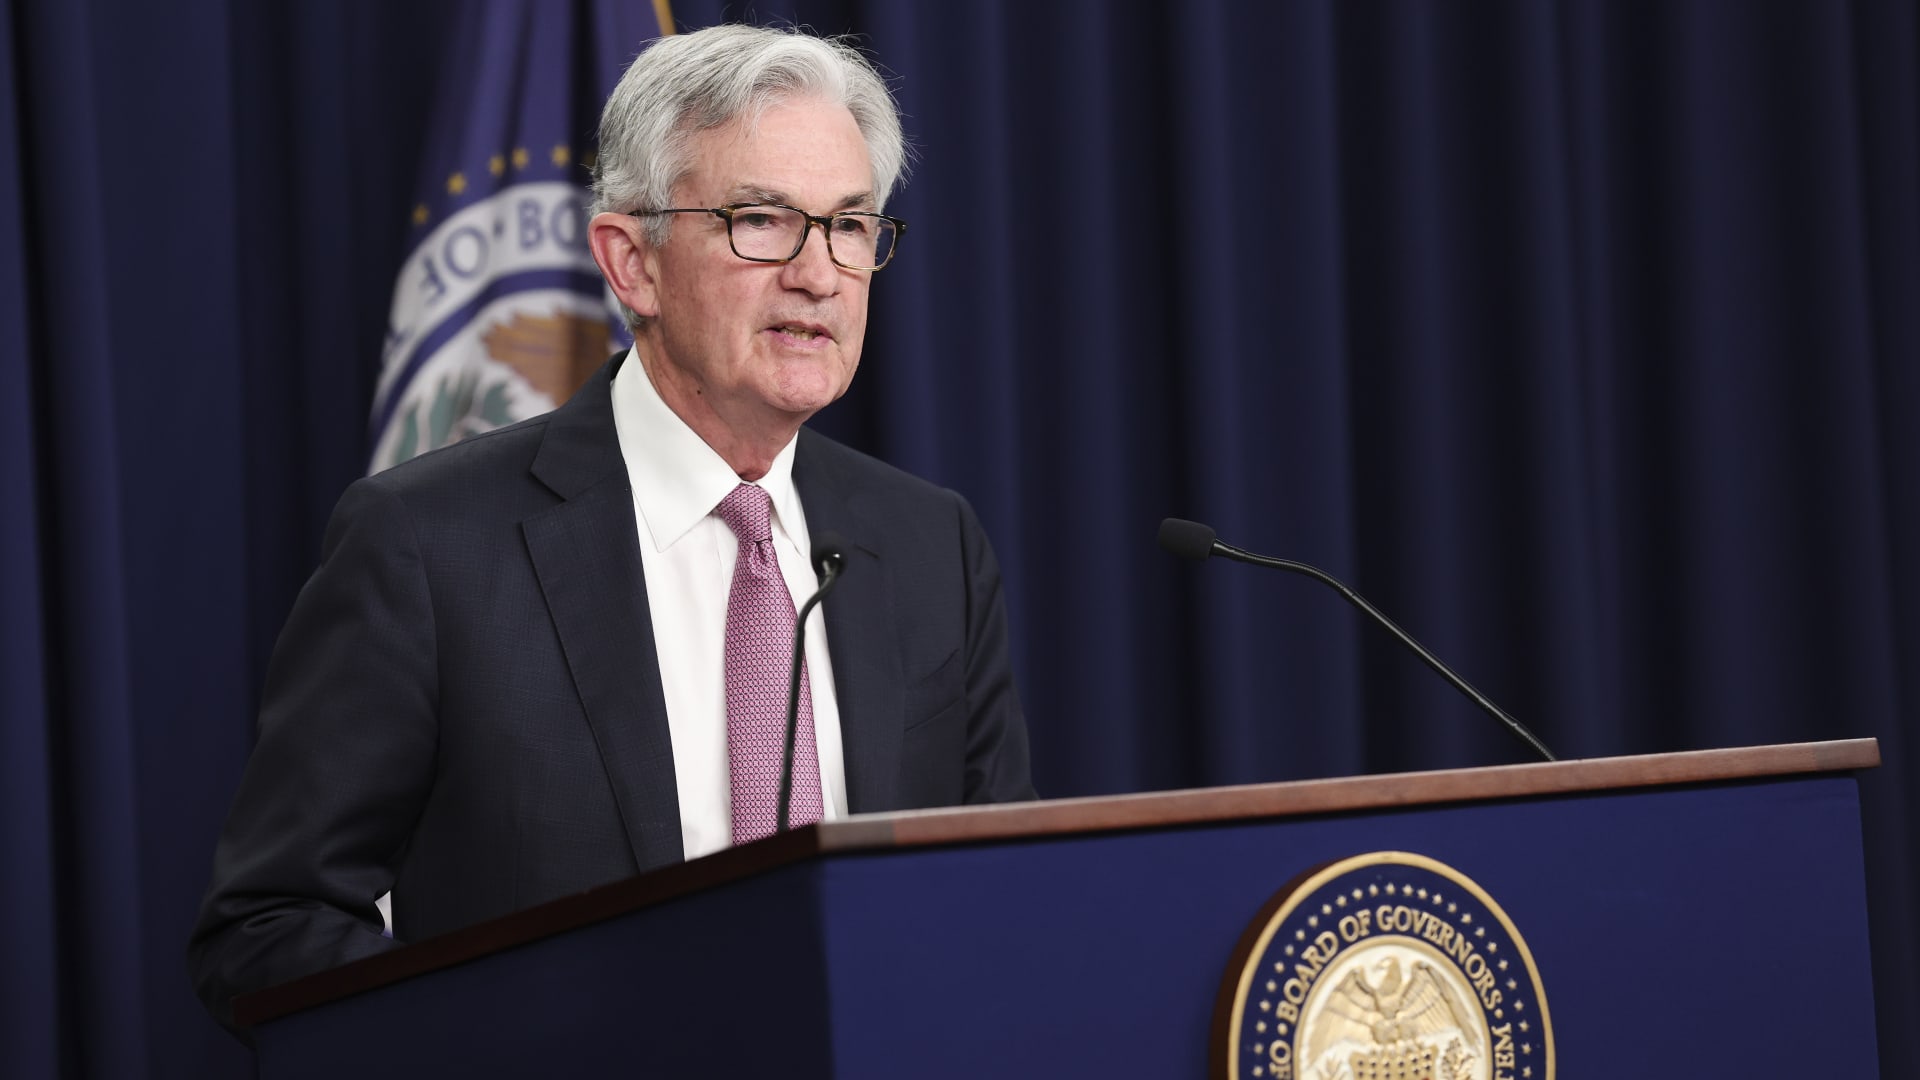 The Fed raises interest rates by half a percentage point – the largest increase in two decades – to fight inflation